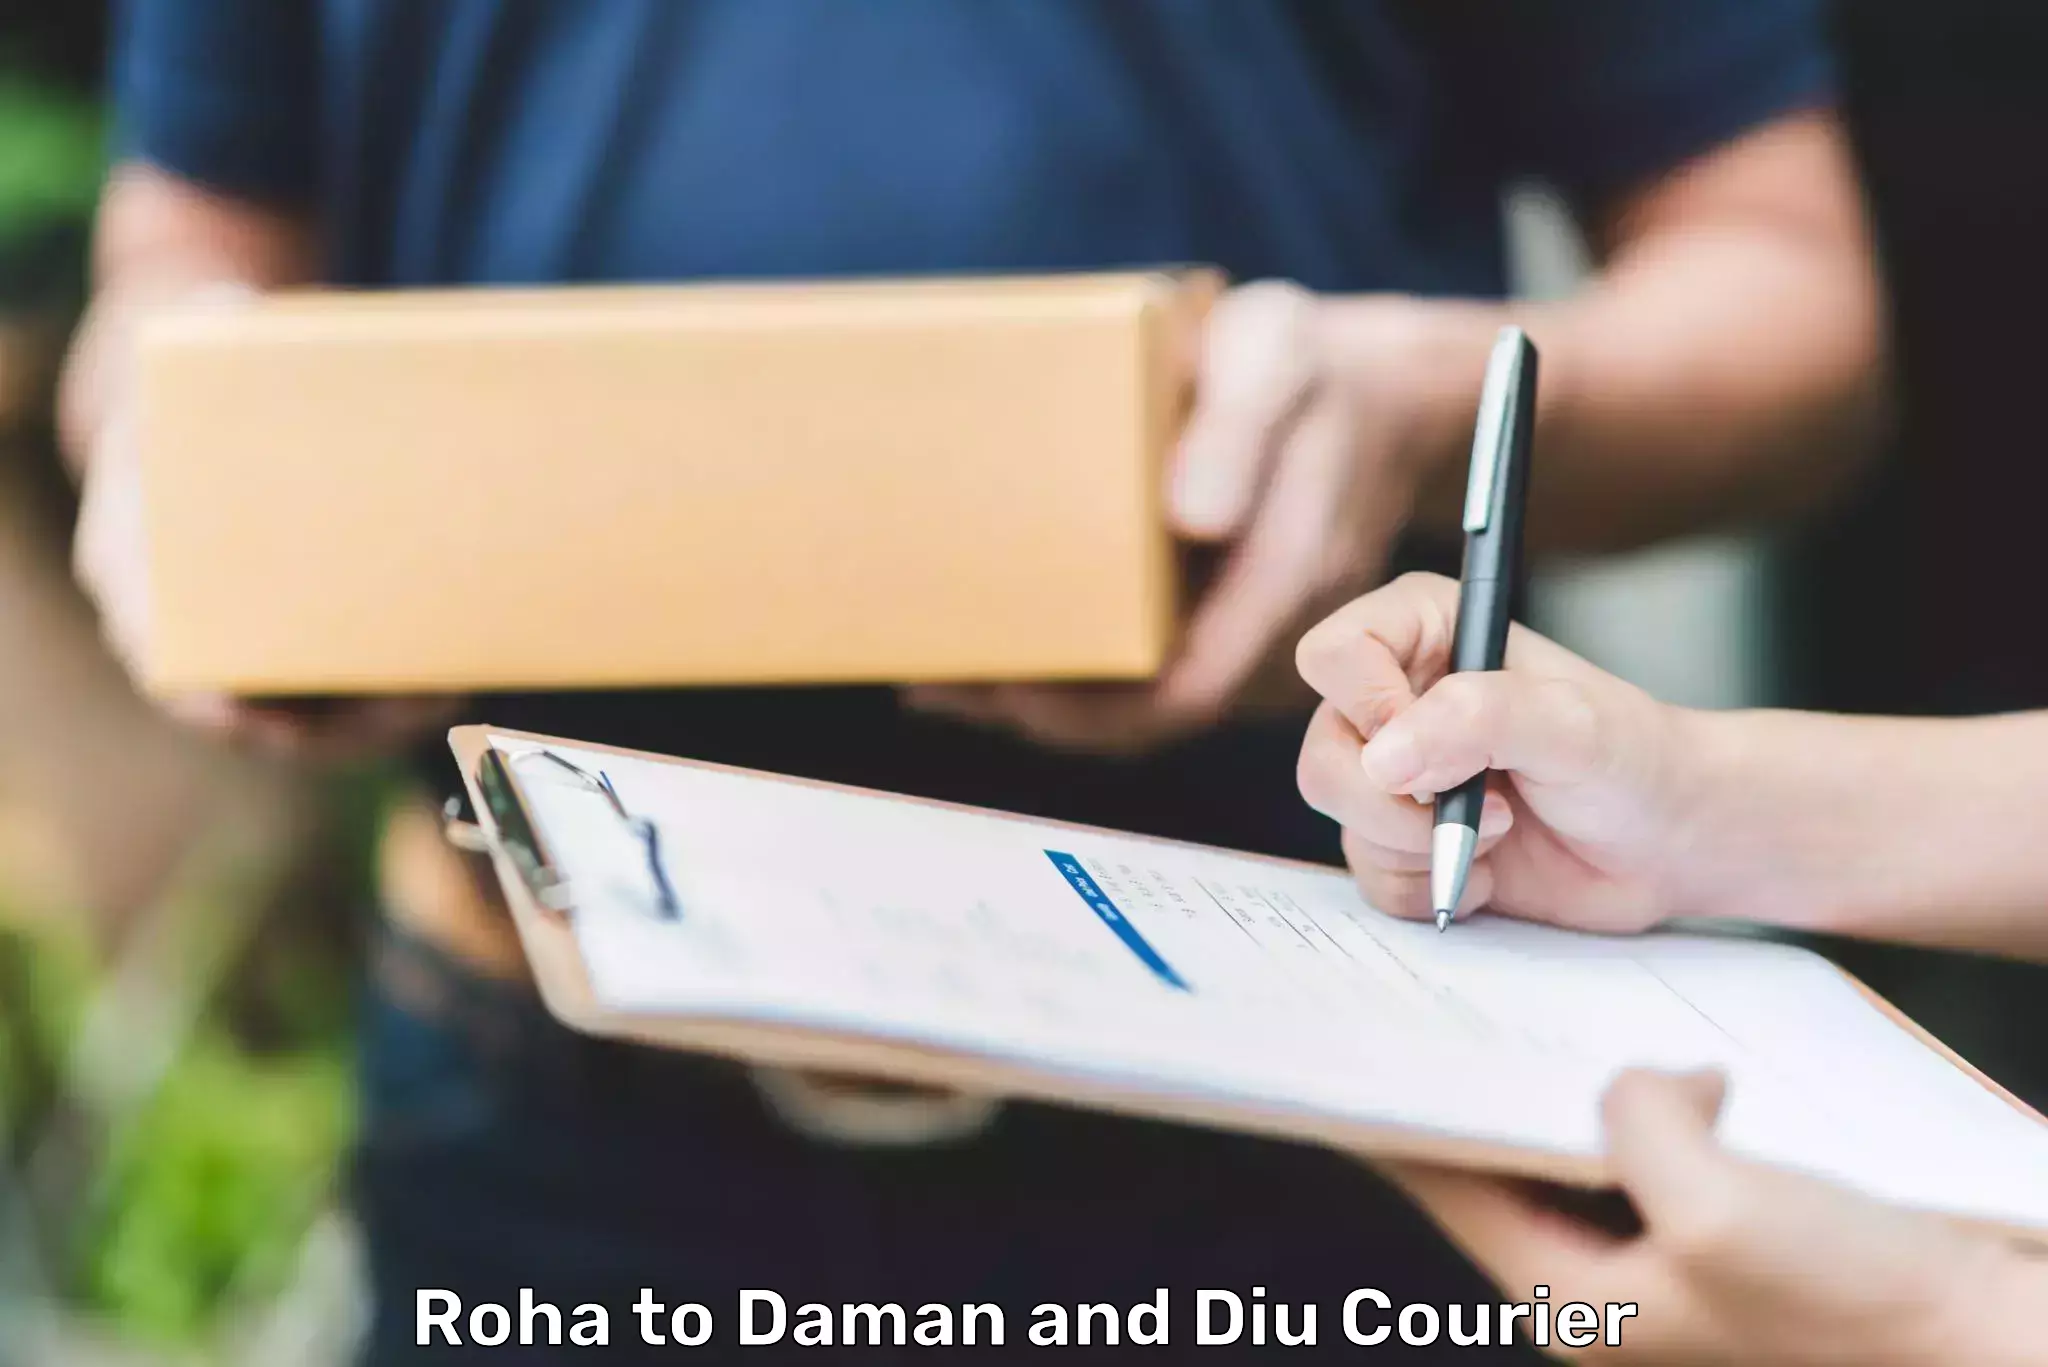 Courier service innovation Roha to Daman and Diu